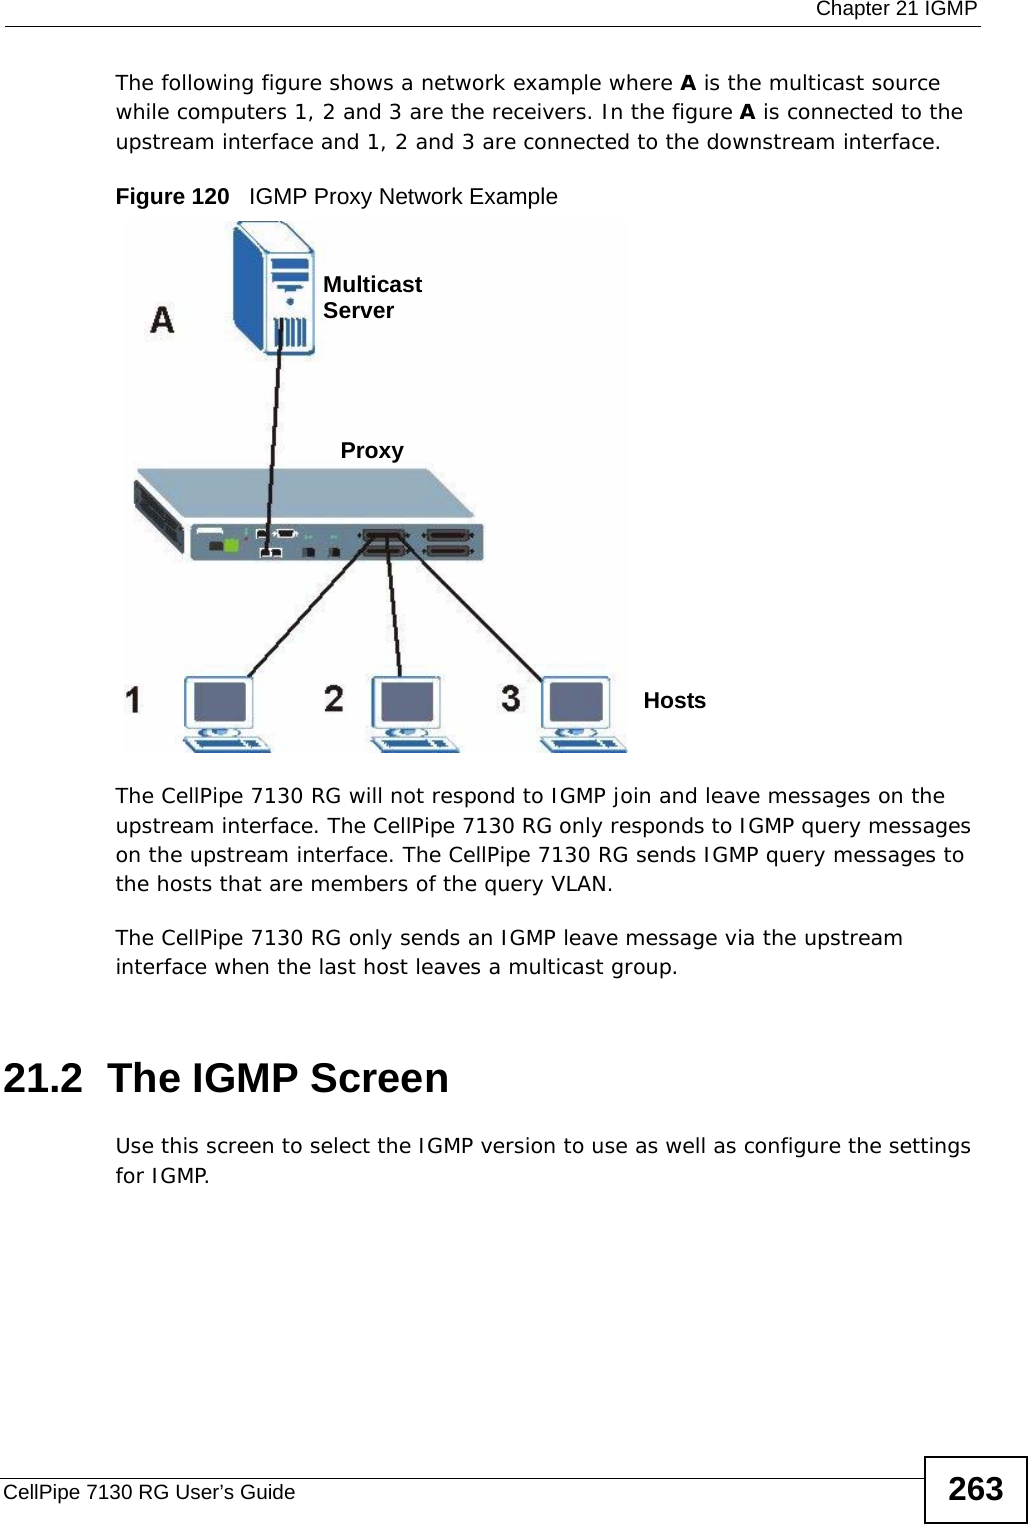  Chapter 21 IGMPCellPipe 7130 RG User’s Guide 263The following figure shows a network example where A is the multicast source while computers 1, 2 and 3 are the receivers. In the figure A is connected to the upstream interface and 1, 2 and 3 are connected to the downstream interface.Figure 120   IGMP Proxy Network ExampleThe CellPipe 7130 RG will not respond to IGMP join and leave messages on the upstream interface. The CellPipe 7130 RG only responds to IGMP query messages on the upstream interface. The CellPipe 7130 RG sends IGMP query messages to the hosts that are members of the query VLAN.The CellPipe 7130 RG only sends an IGMP leave message via the upstream interface when the last host leaves a multicast group.21.2  The IGMP ScreenUse this screen to select the IGMP version to use as well as configure the settings for IGMP.ProxyMulticastServerHosts